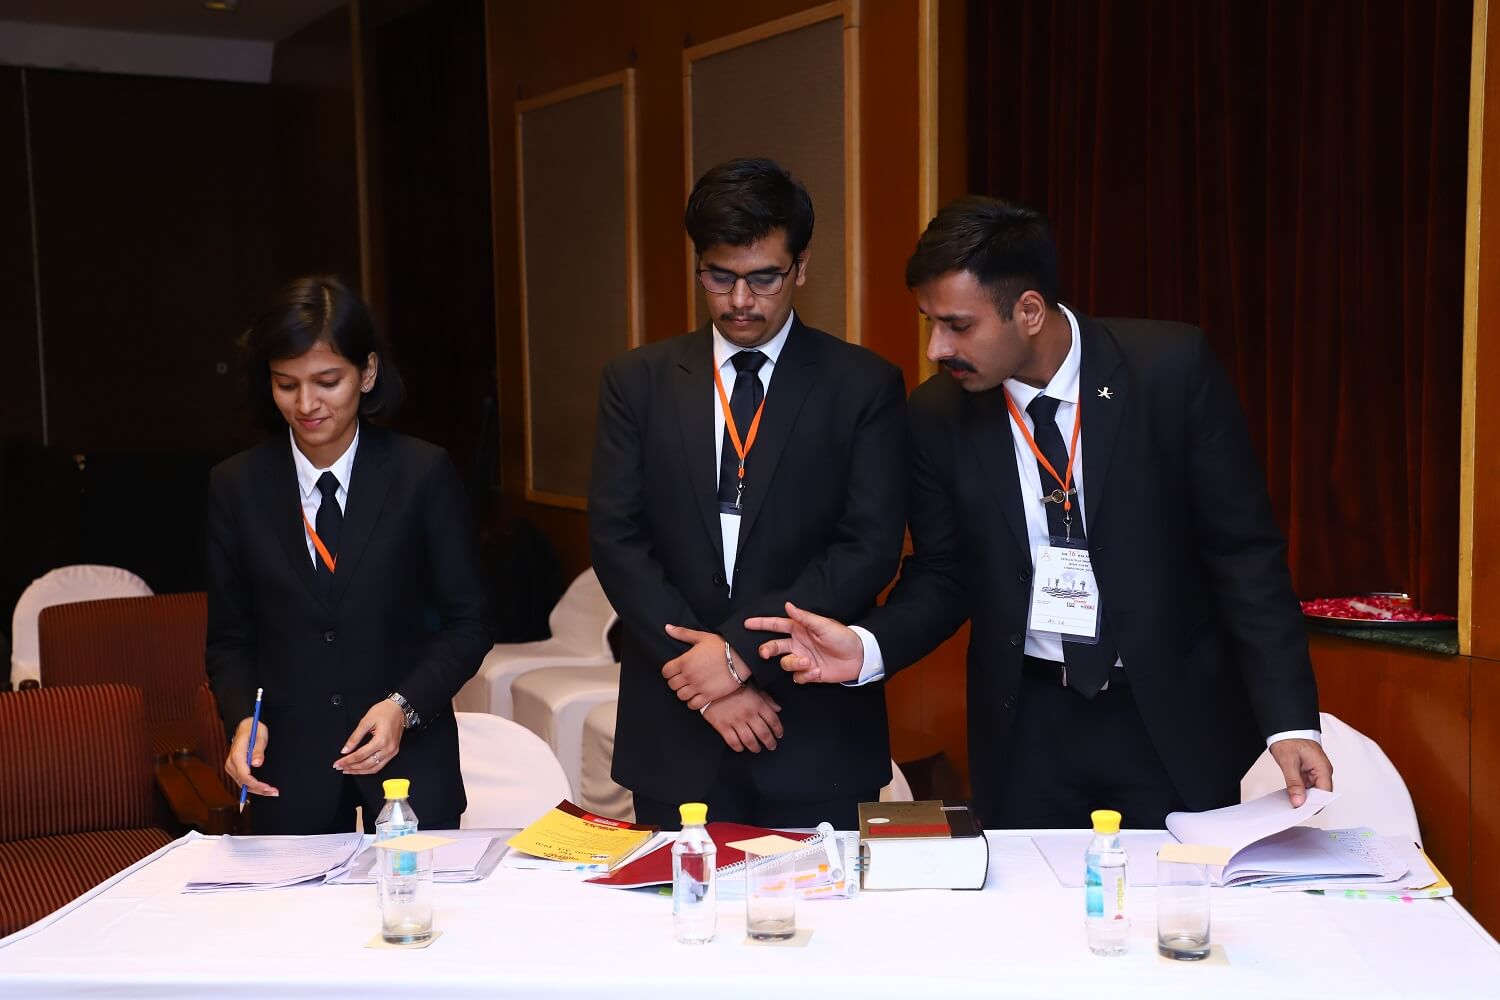 16th Annual Raj Anand Moot Competition